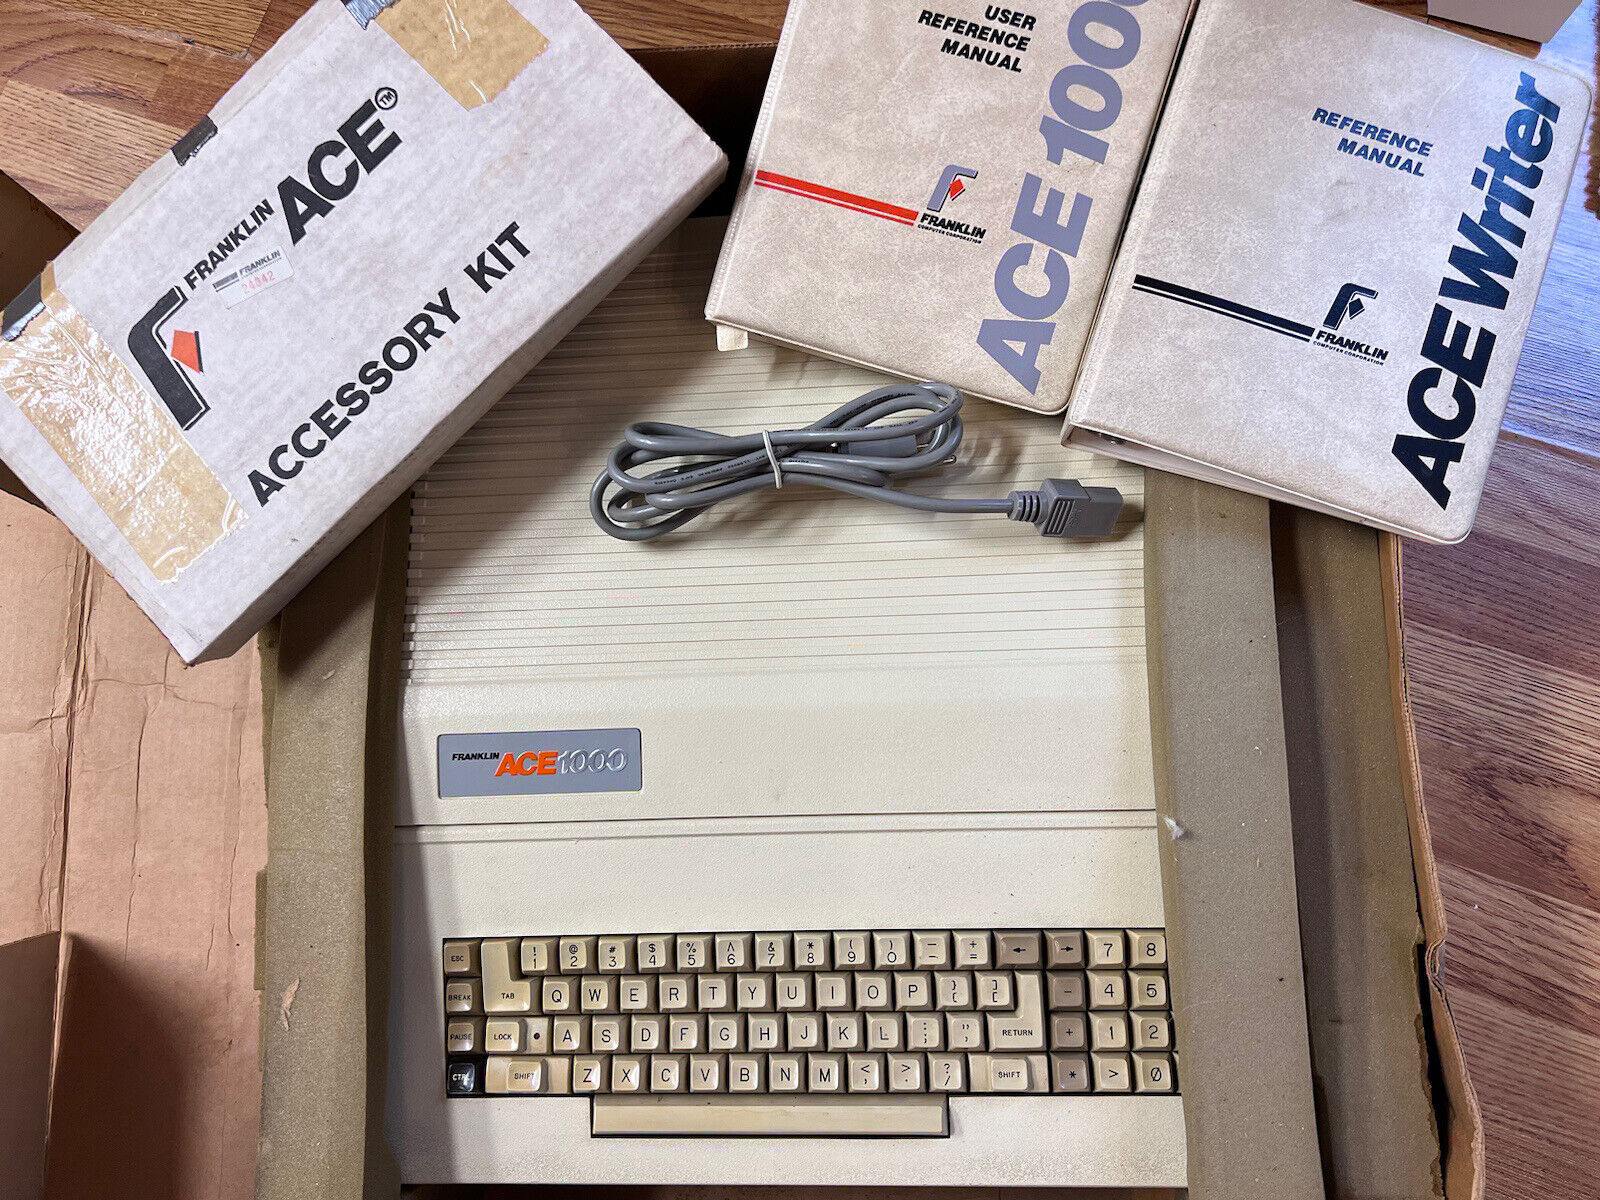 Franklin Ace 1000 Vintage Computer With Original Box, Manuals- Tested POWER ON